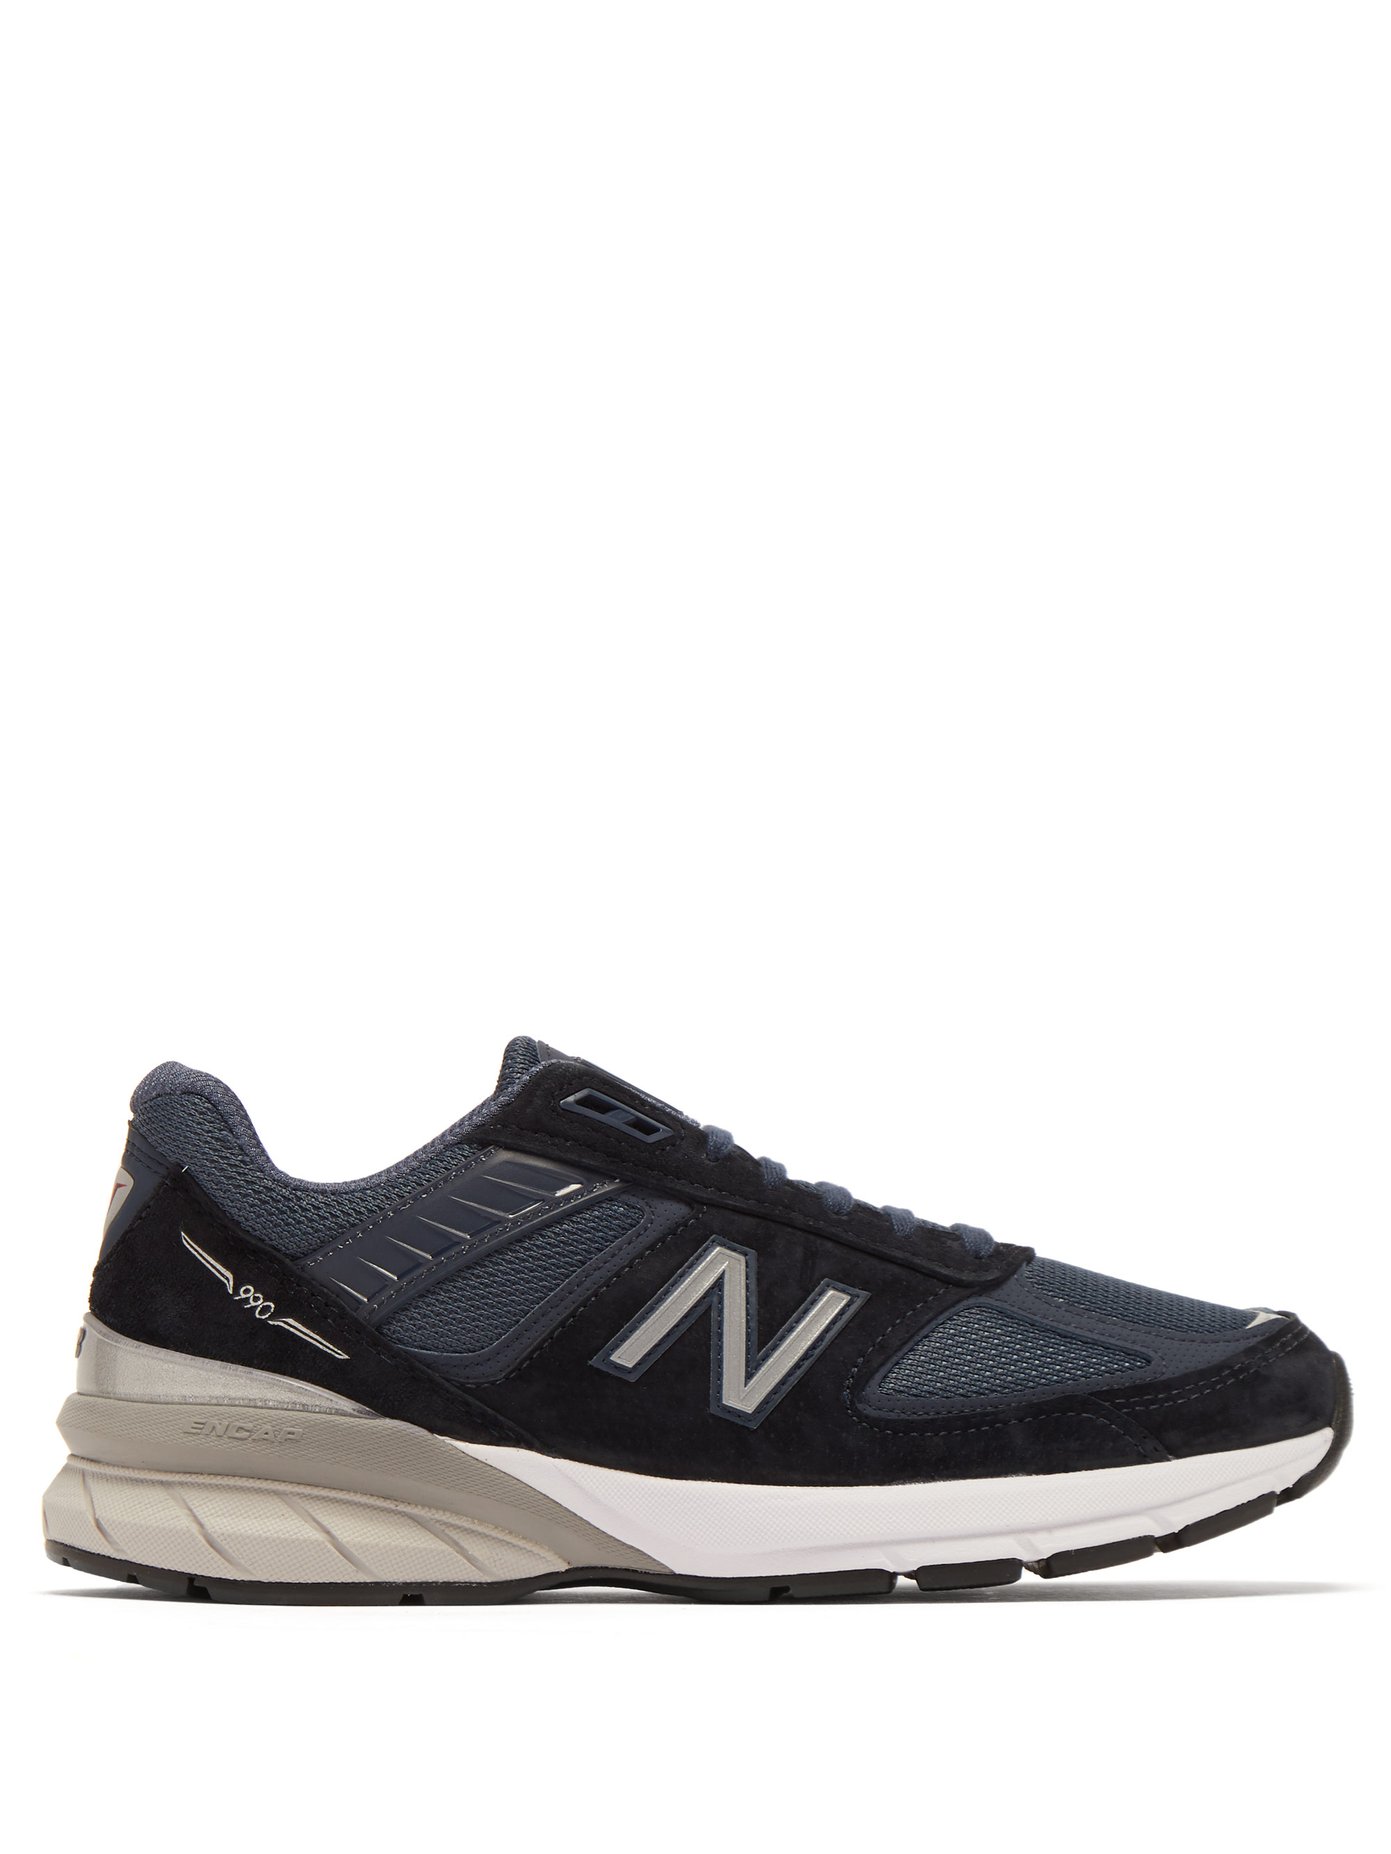 990v5 suede and mesh trainers | New 